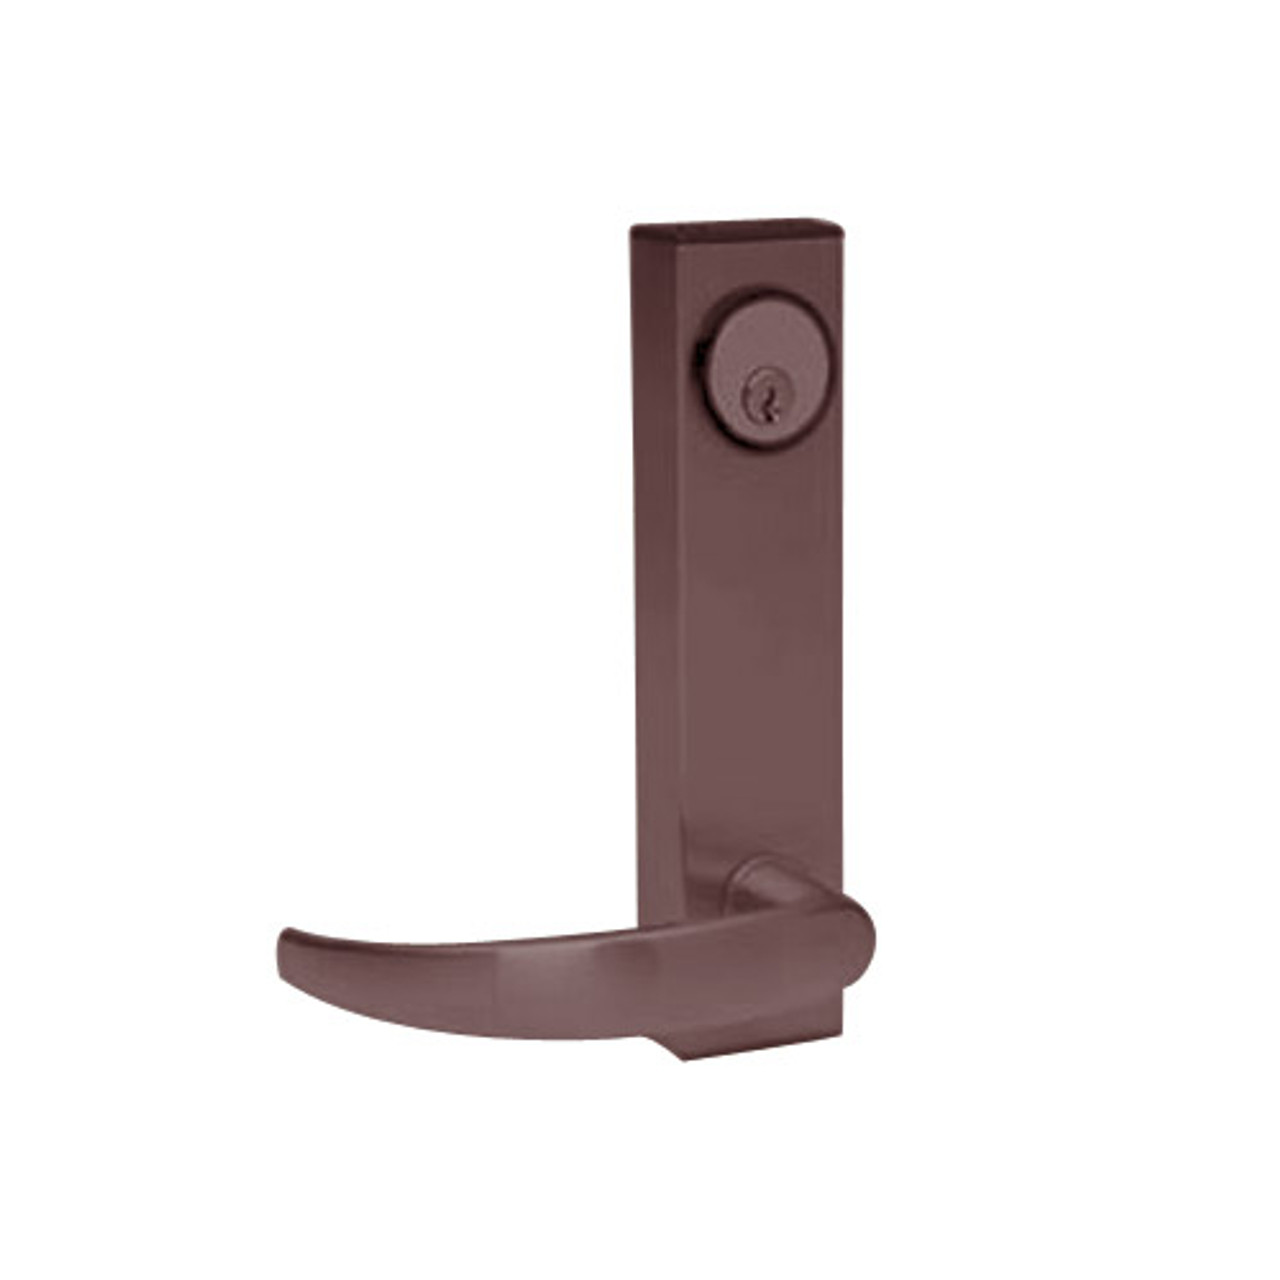 3080E-01-0-93-35 US10B Adams Rite Electrified Entry Trim with Curve Lever in Oil Rubbed Bronze Finish